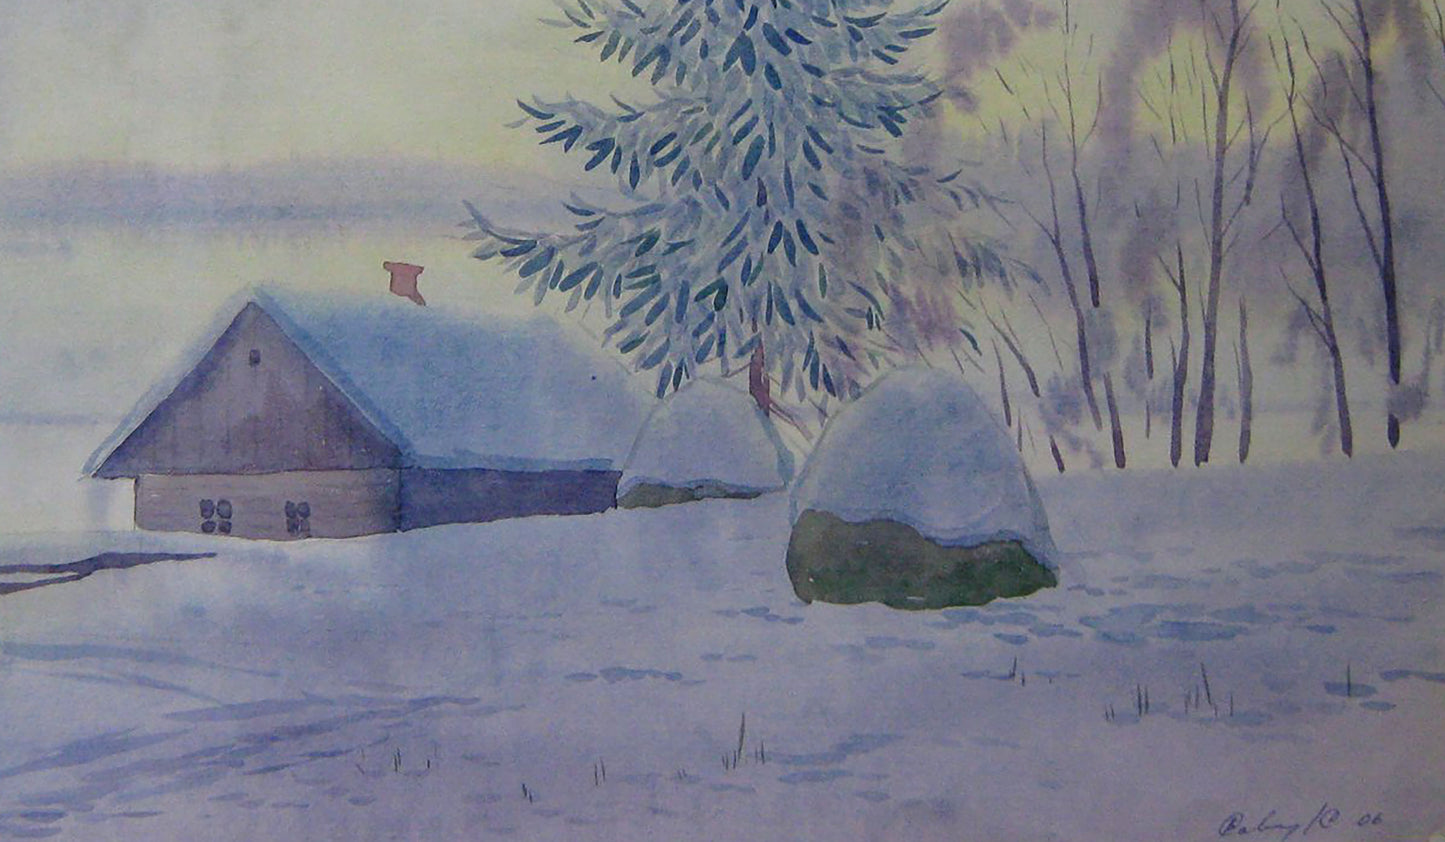 January Morning portrayed in a watercolor painting by Valery Savenets